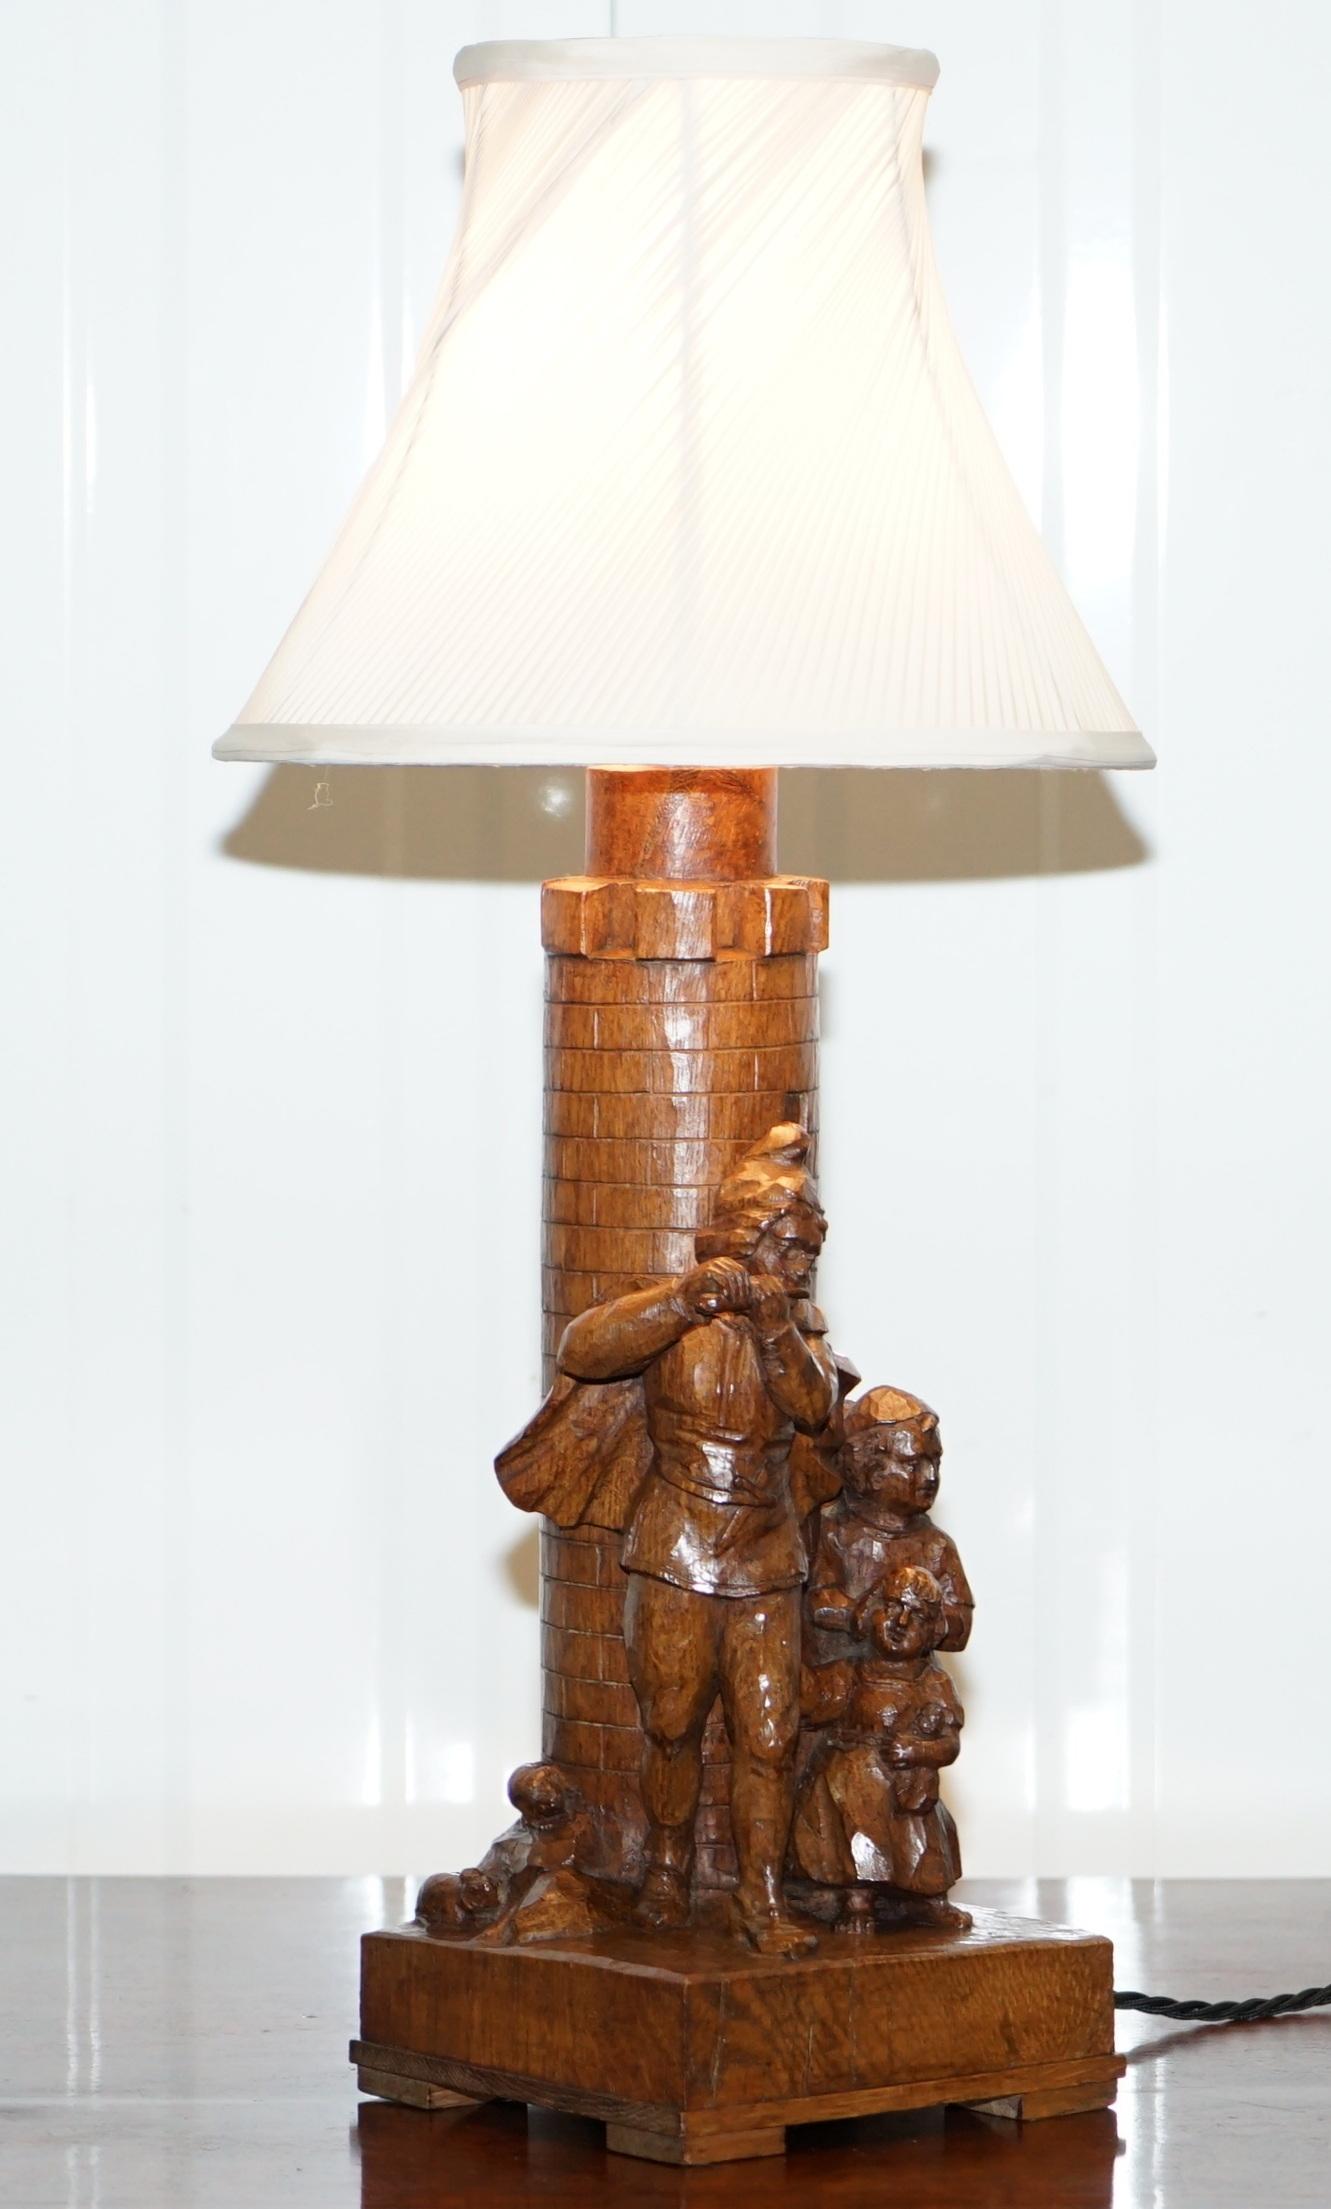 We are delighted to offer for sale this totally original handmade from Black Forest timber Arts & Crafts large table lamp depicting the pied piper of Hamelin and the children following him

A stunning decorative Folk Art hand carved table lamp,